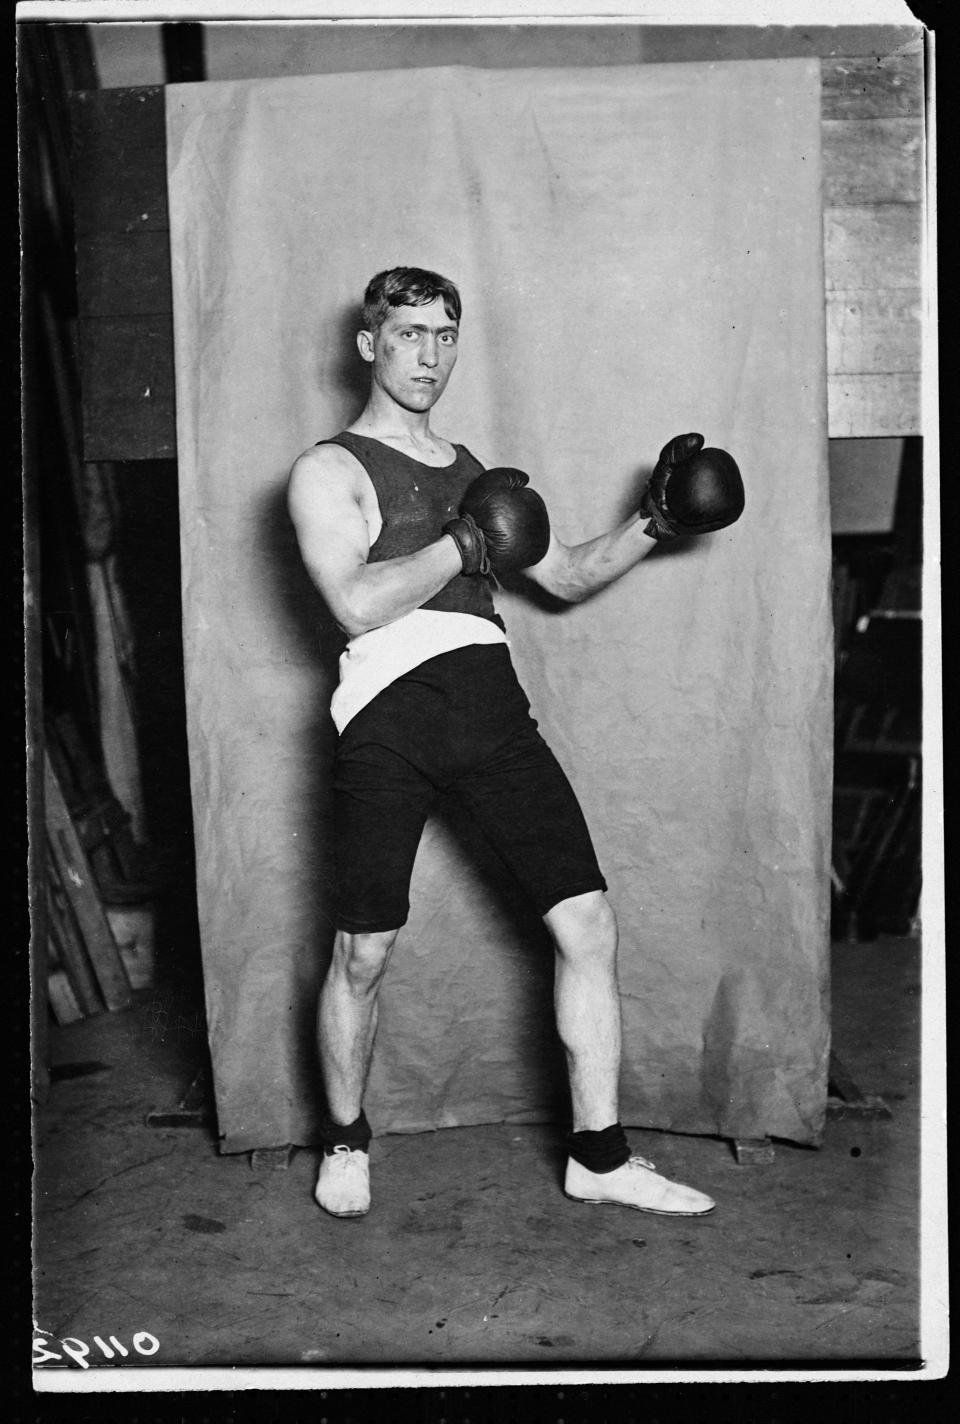 Frederick Grace poses for a black and white photo with boxing gloves on in 1908.